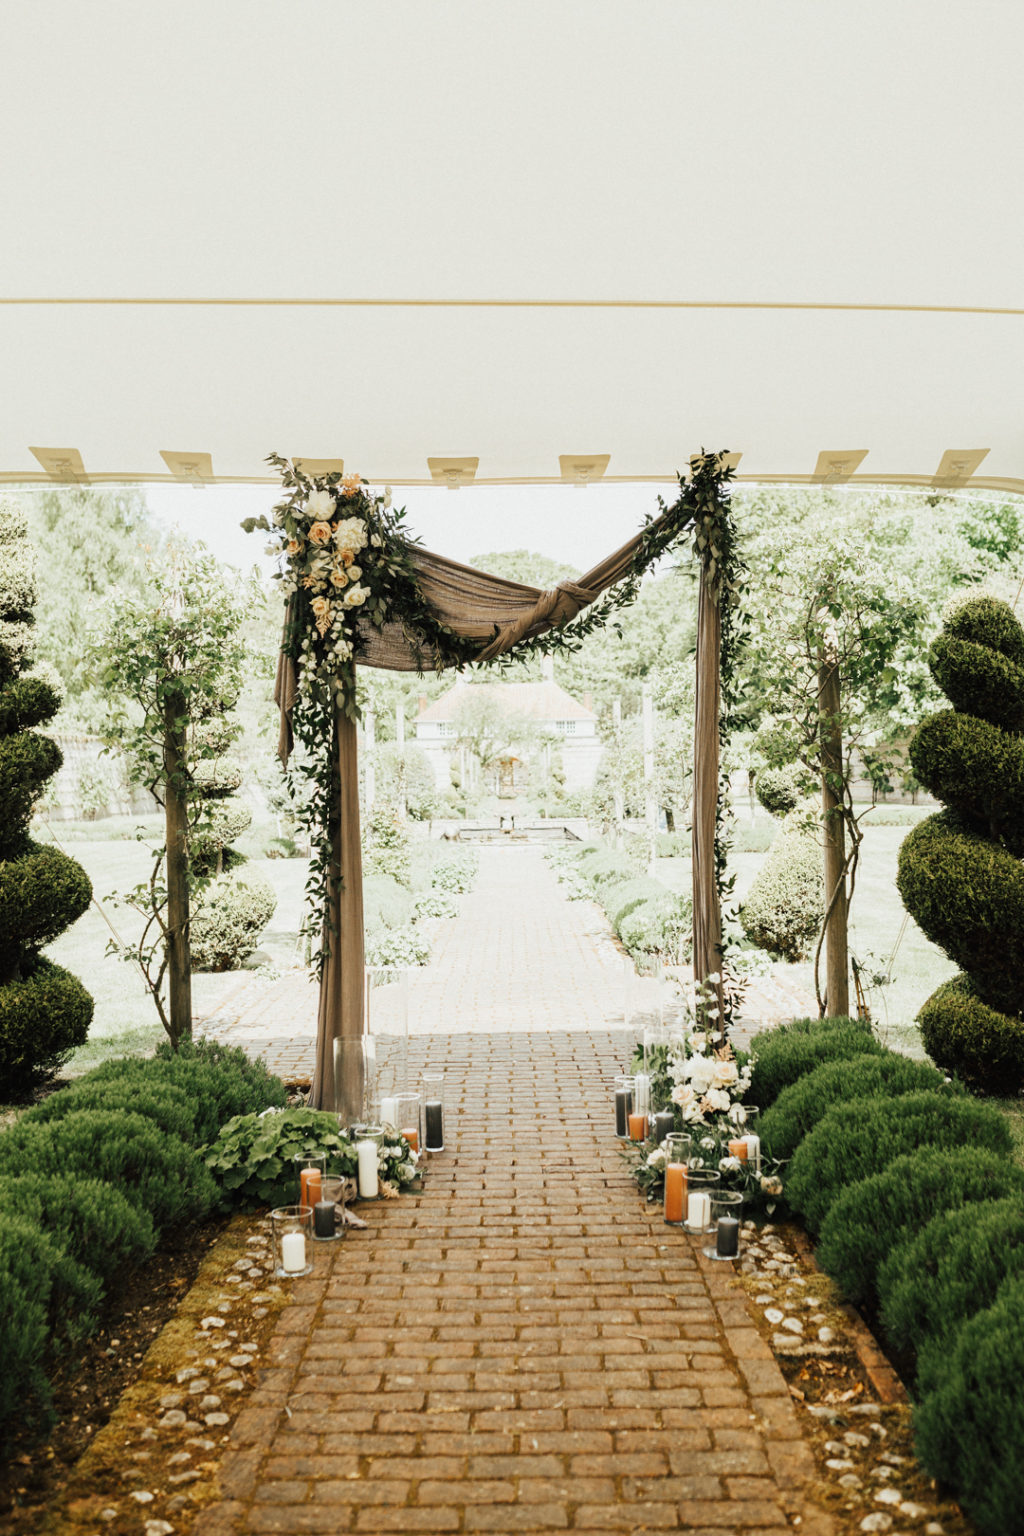 The wedding arch was decorated with burlap, blooms, greenery and with candles on the ground